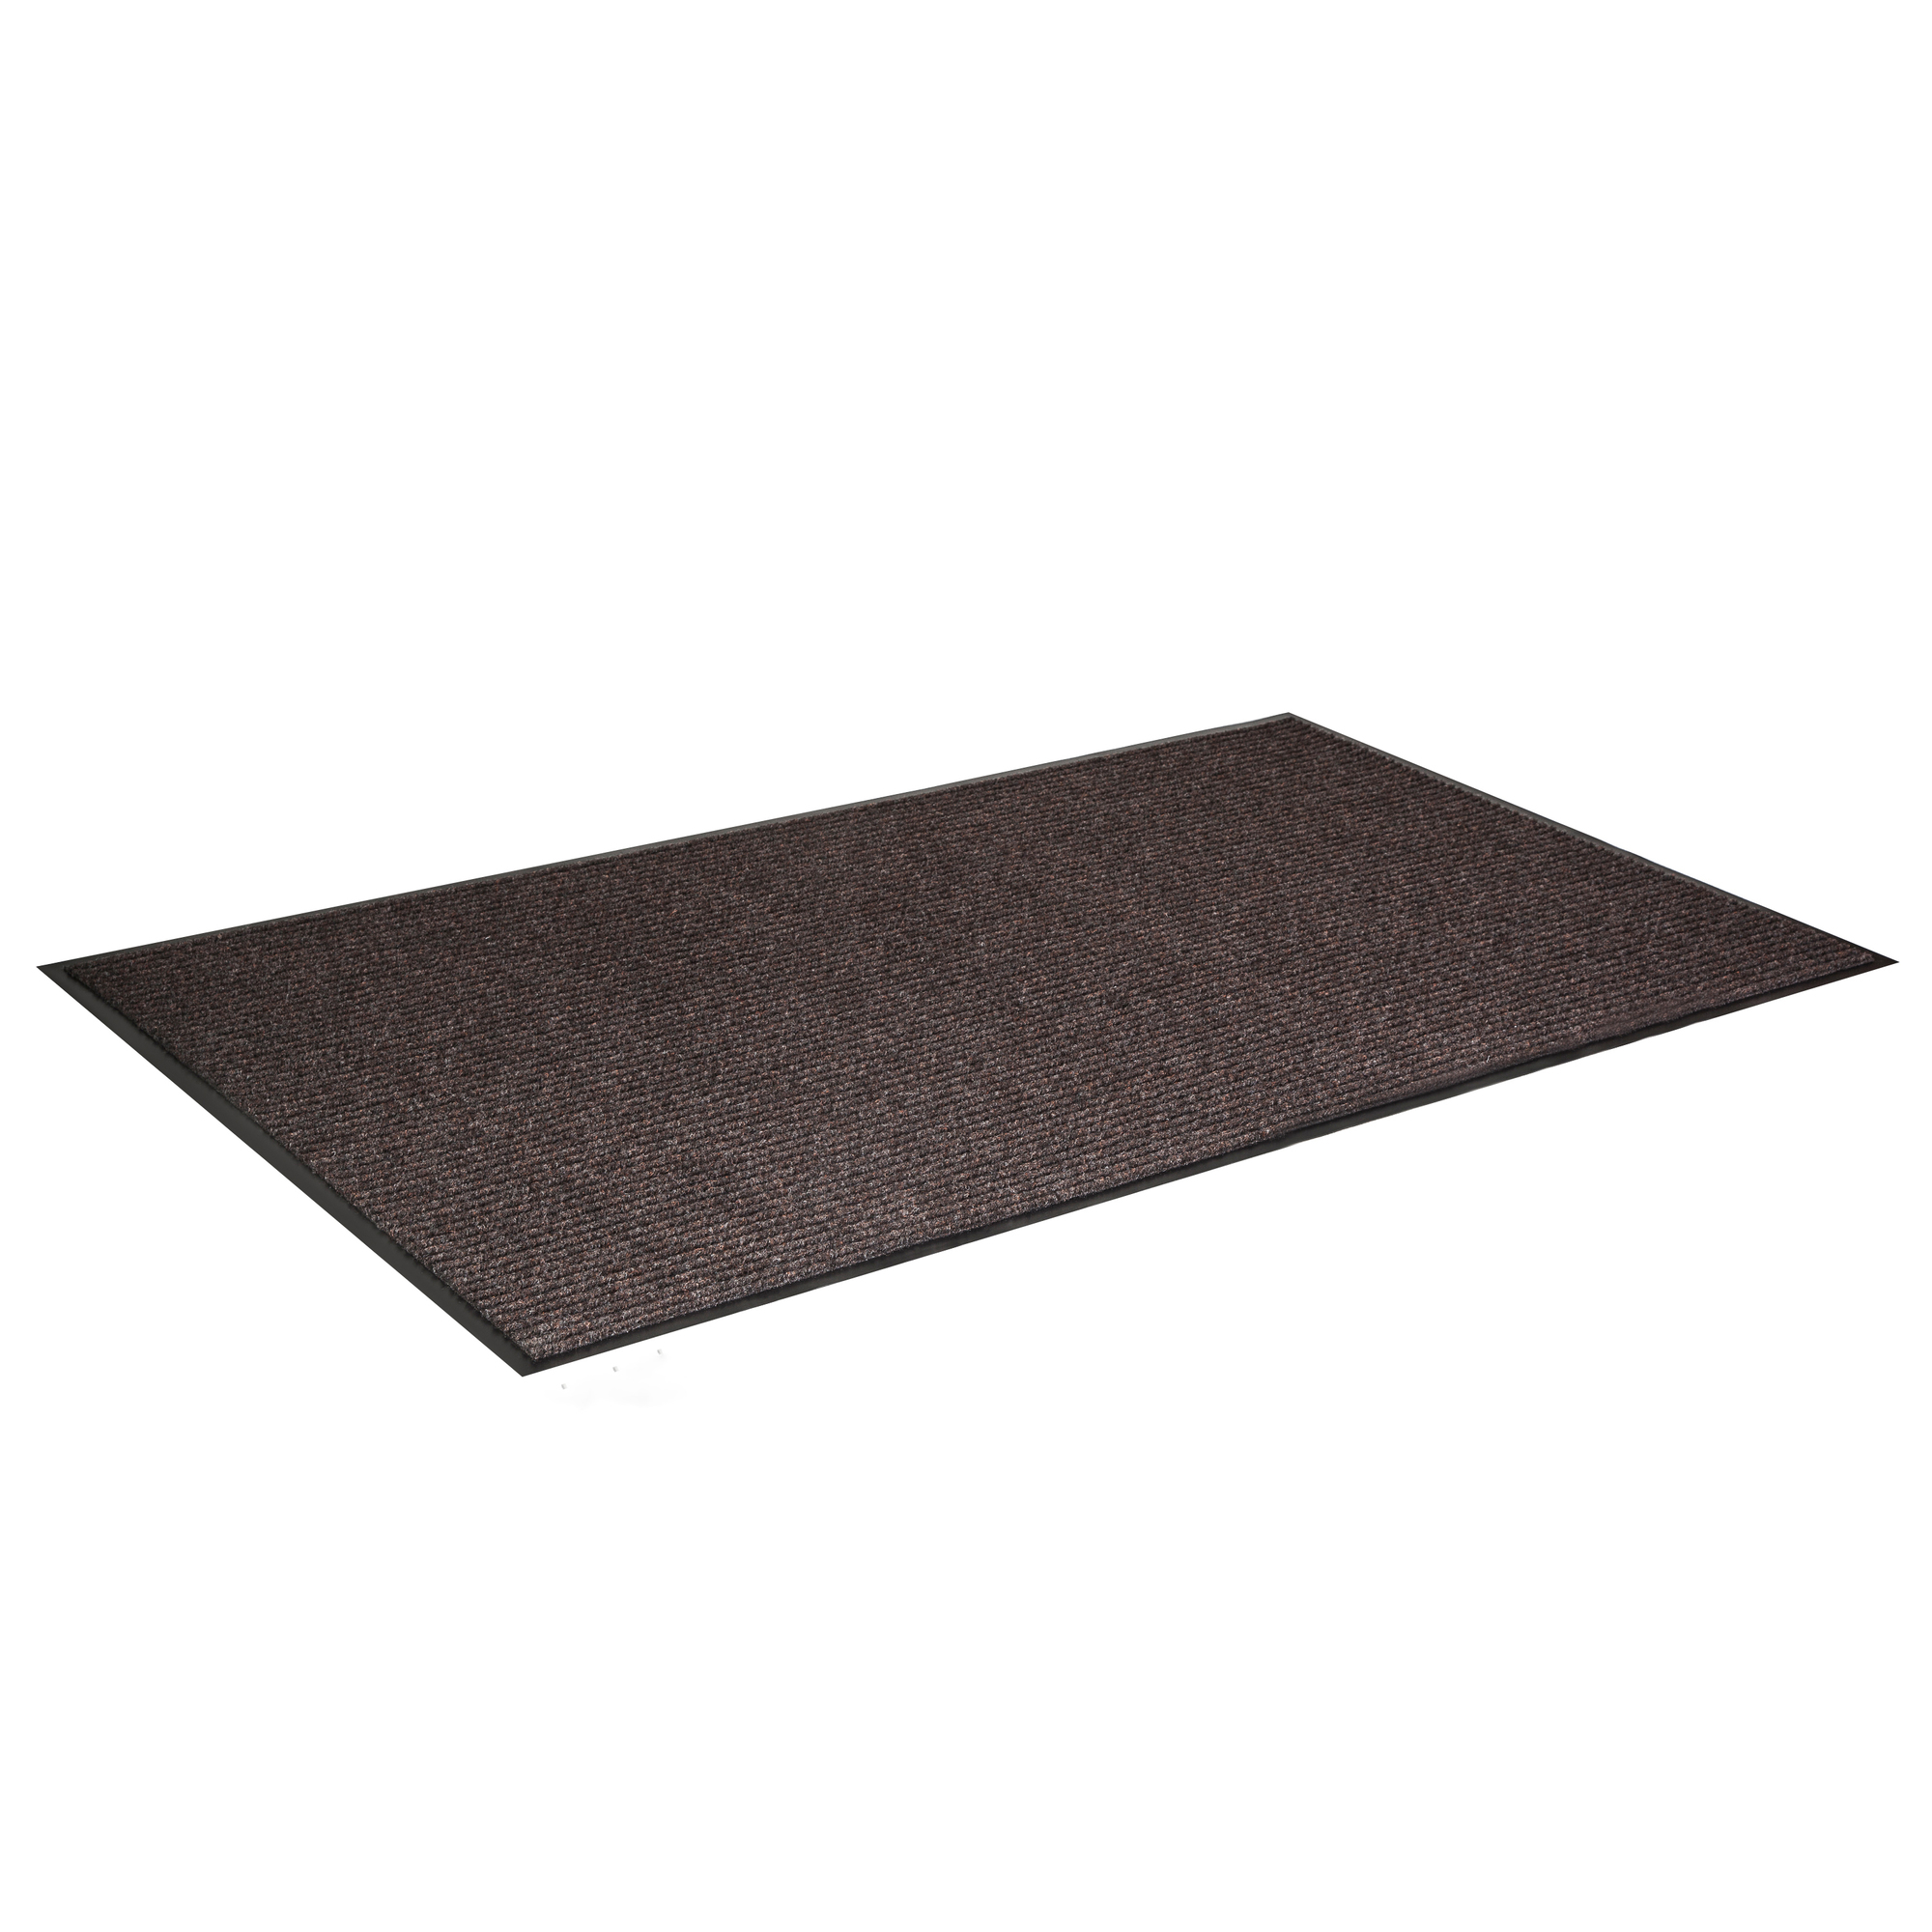 Crown Matting Technologies, Needle-Rib 4ft.x6ft. Brown, Width 48 in, Length 72 in, Thickness 5/16 in, Model NR 0046BR